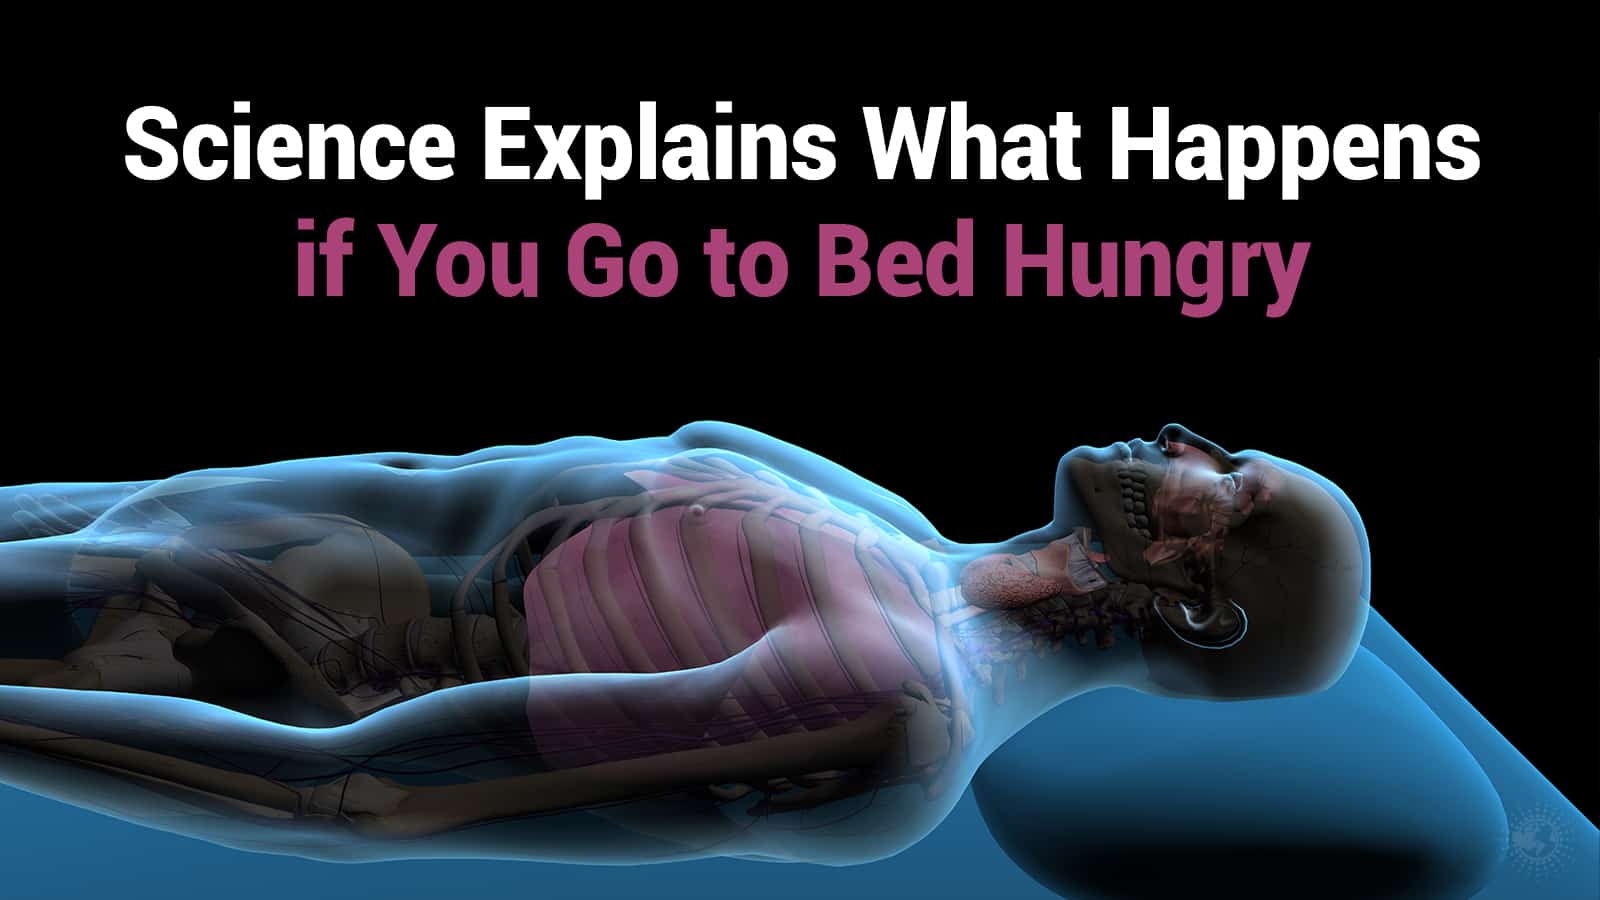 Science Explains What Happens if You Go to Bed Hungry